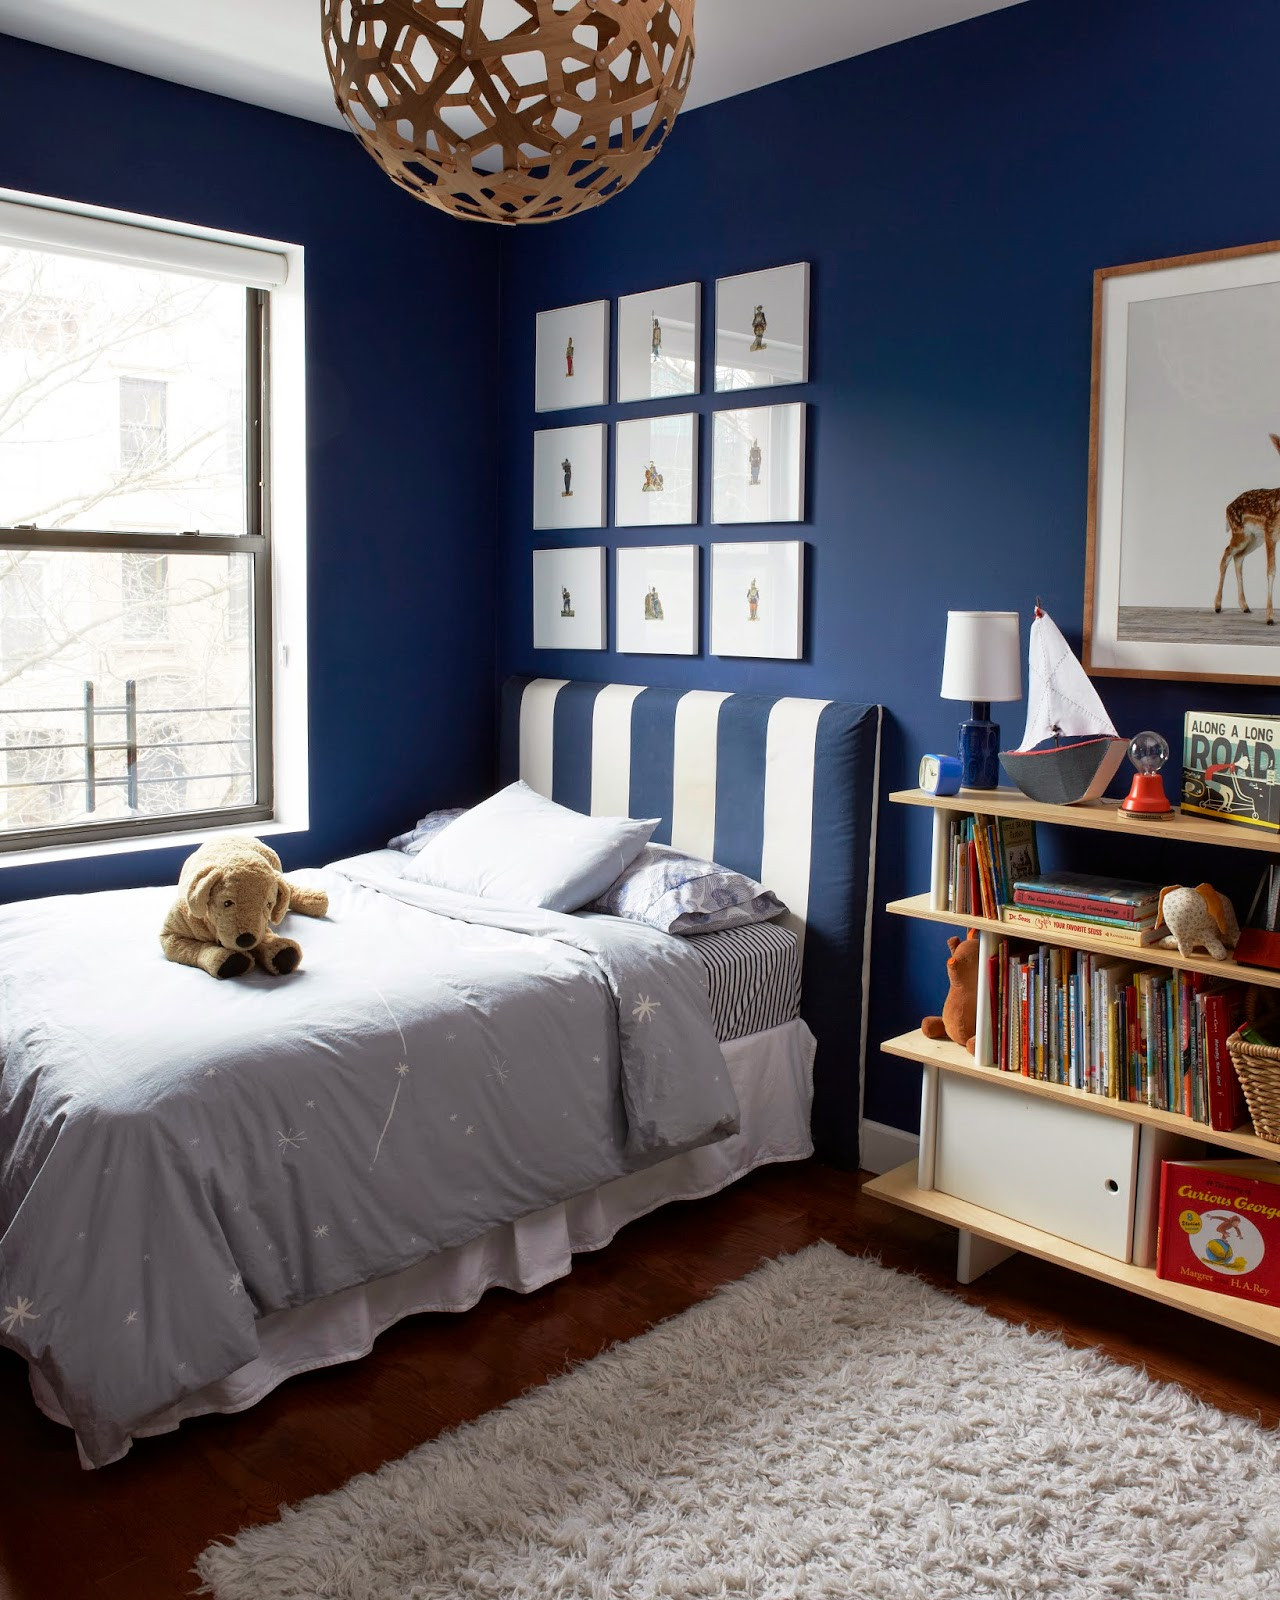 Kids Rooms Paint Color Ideas
 Help Which Bedroom Paint Color Would You Choose